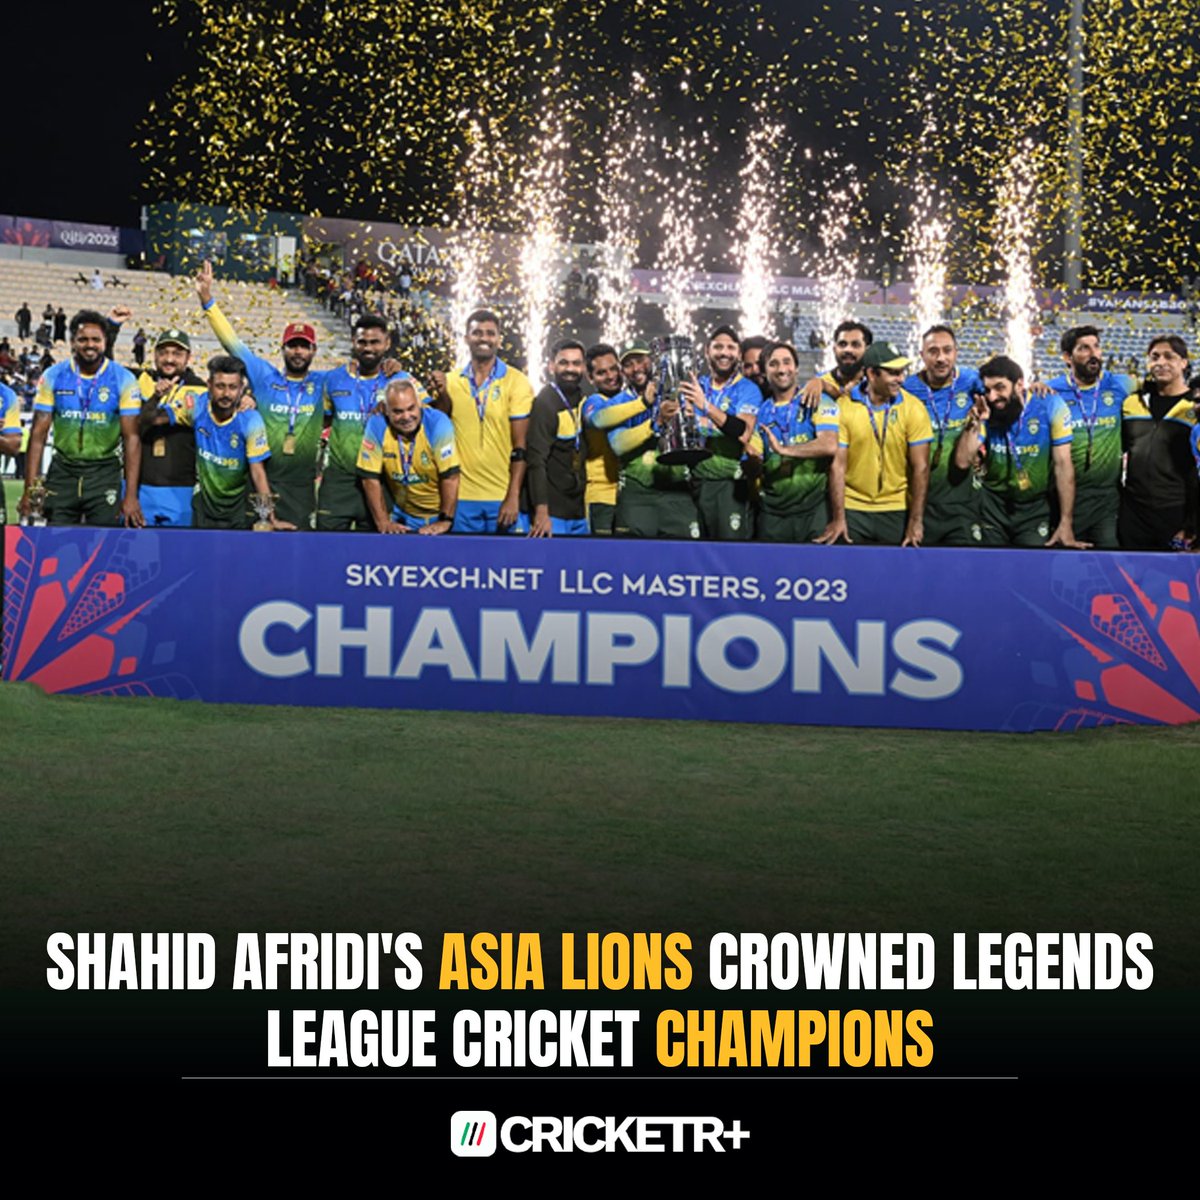 Asia Lions have won their maiden Legends League Cricket title under the captaincy of Afridi, defeating World Giants

#ShahidAfridi #AsiaLions #LegendsLeagueCricket #CricketR #WorldGiants
@SAfridiOfficial